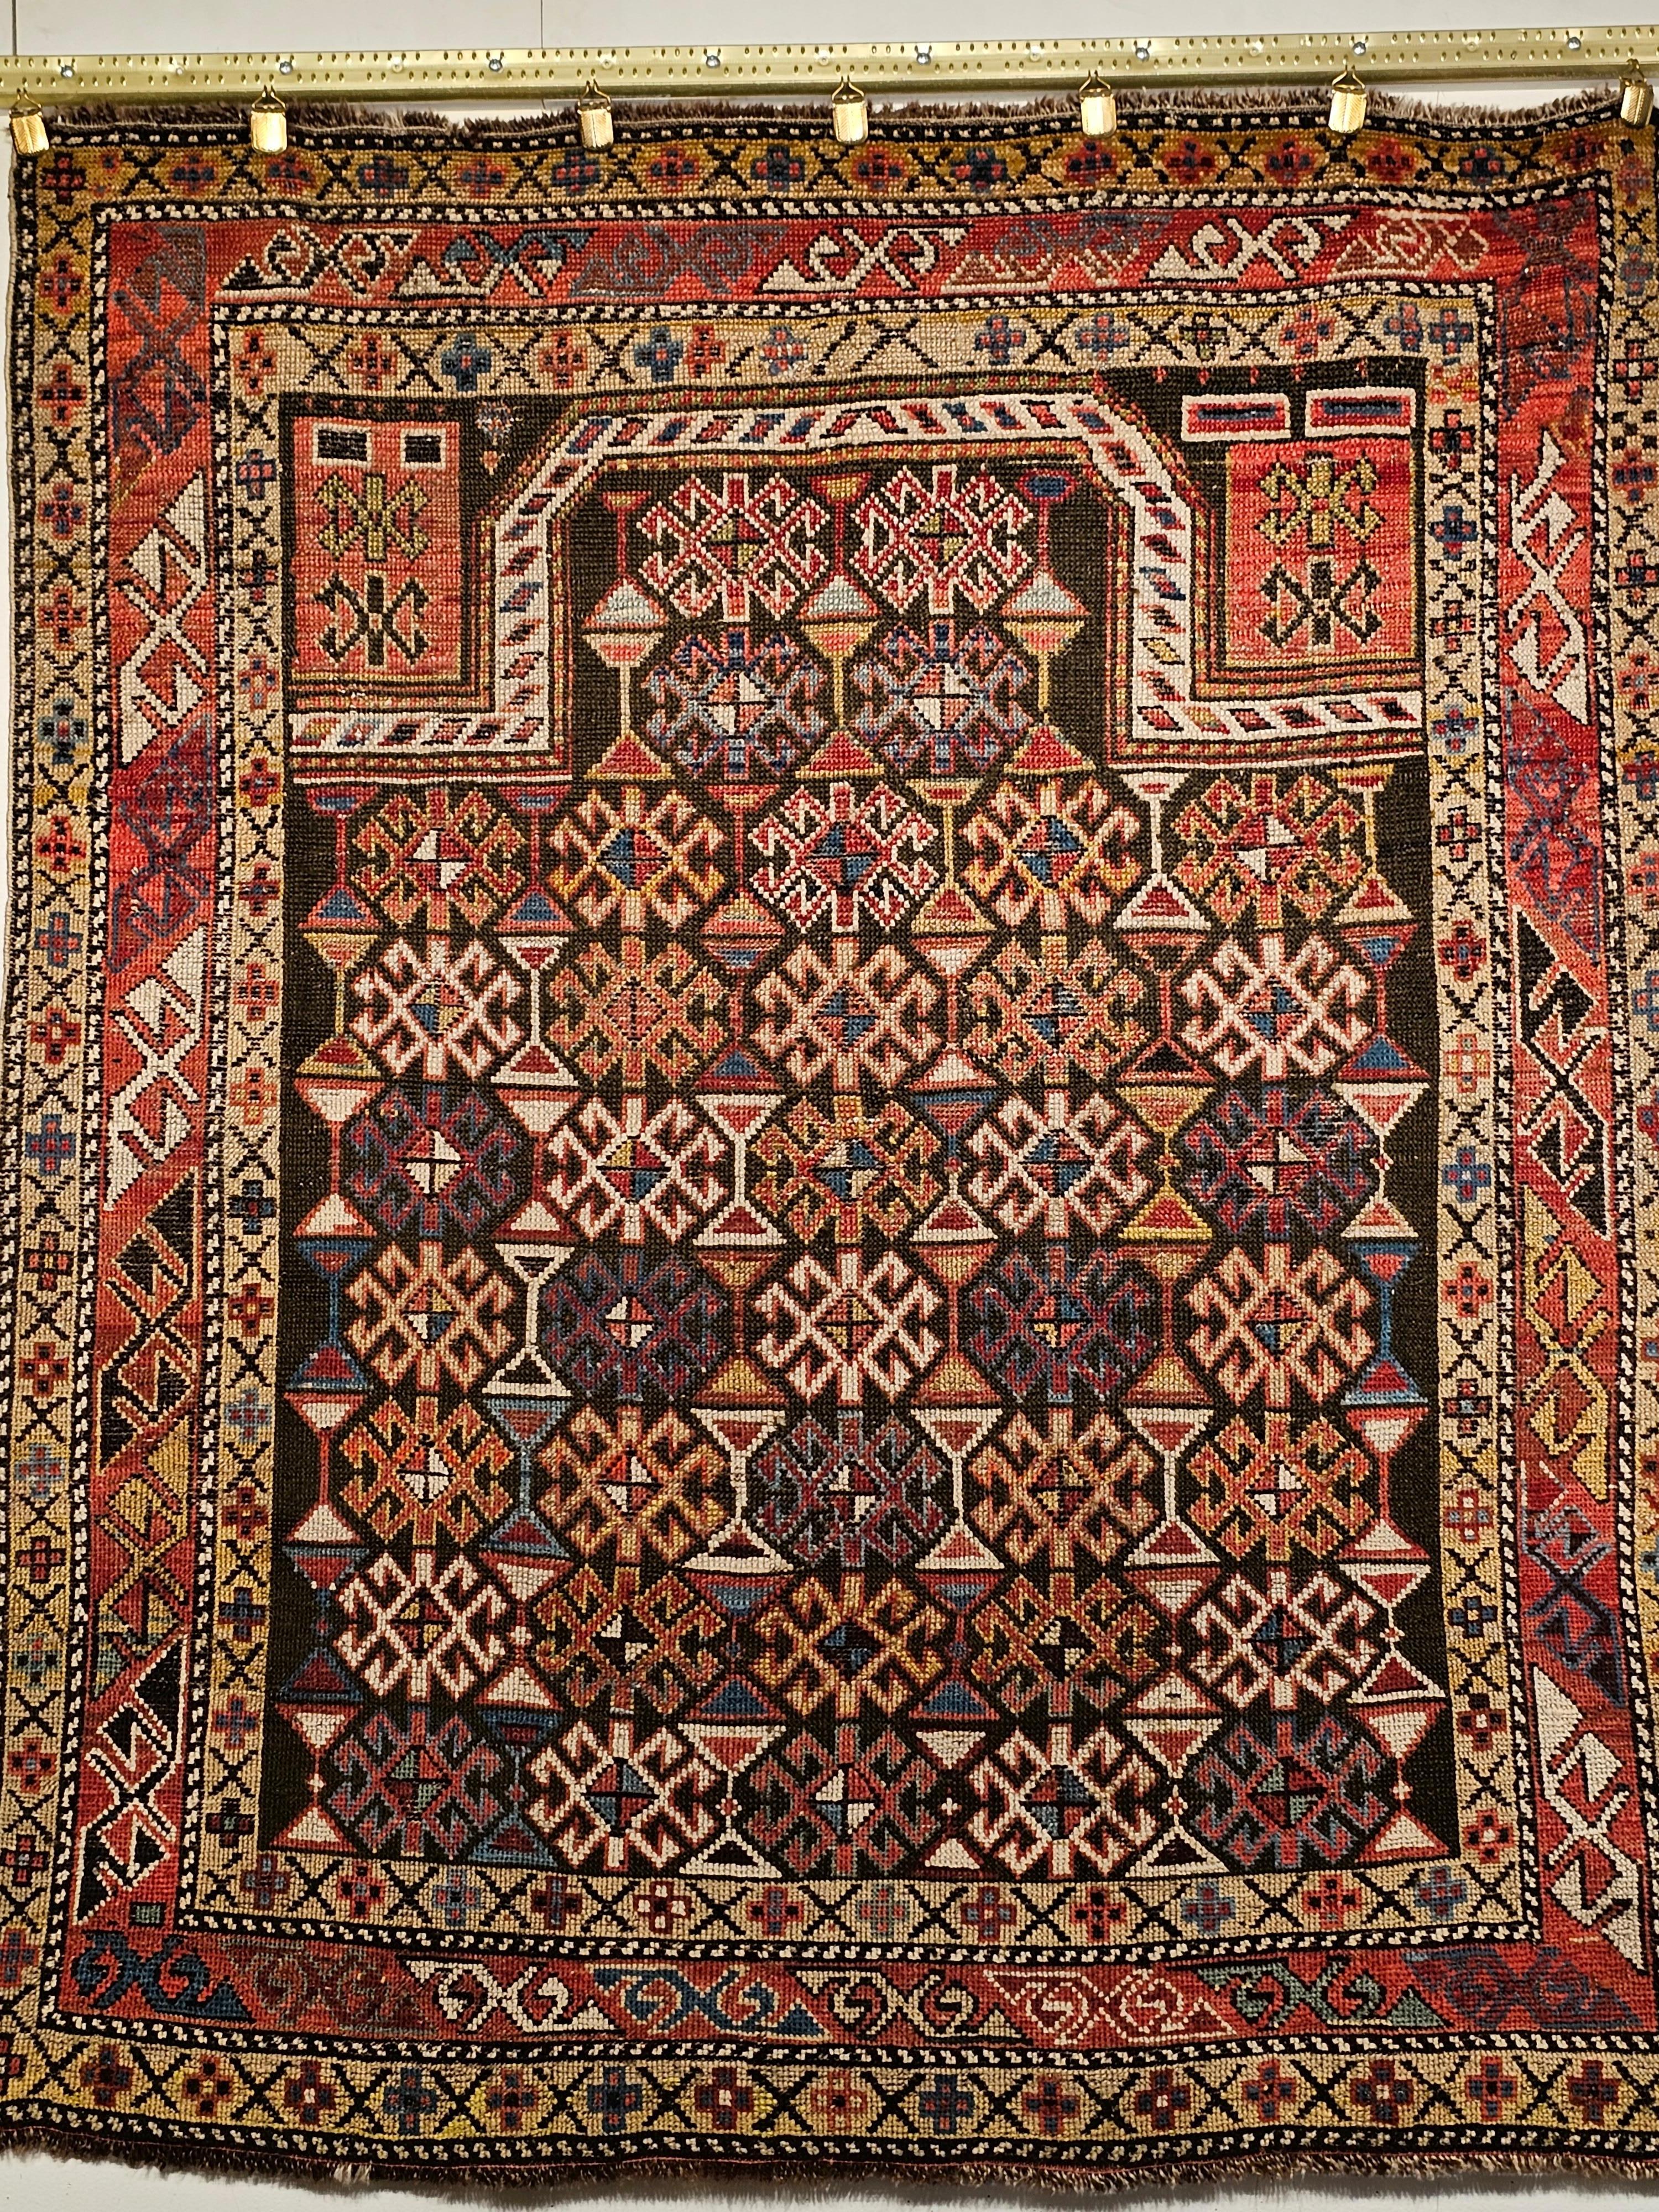 A beautiful Caucasian Shirvan area rug from the southern Azerbaijan region of the Caucasus is in a prayer rug design with an abrash dark brown field.  The field design elements include the “hour glass” and the star patterns repeated in each row. 